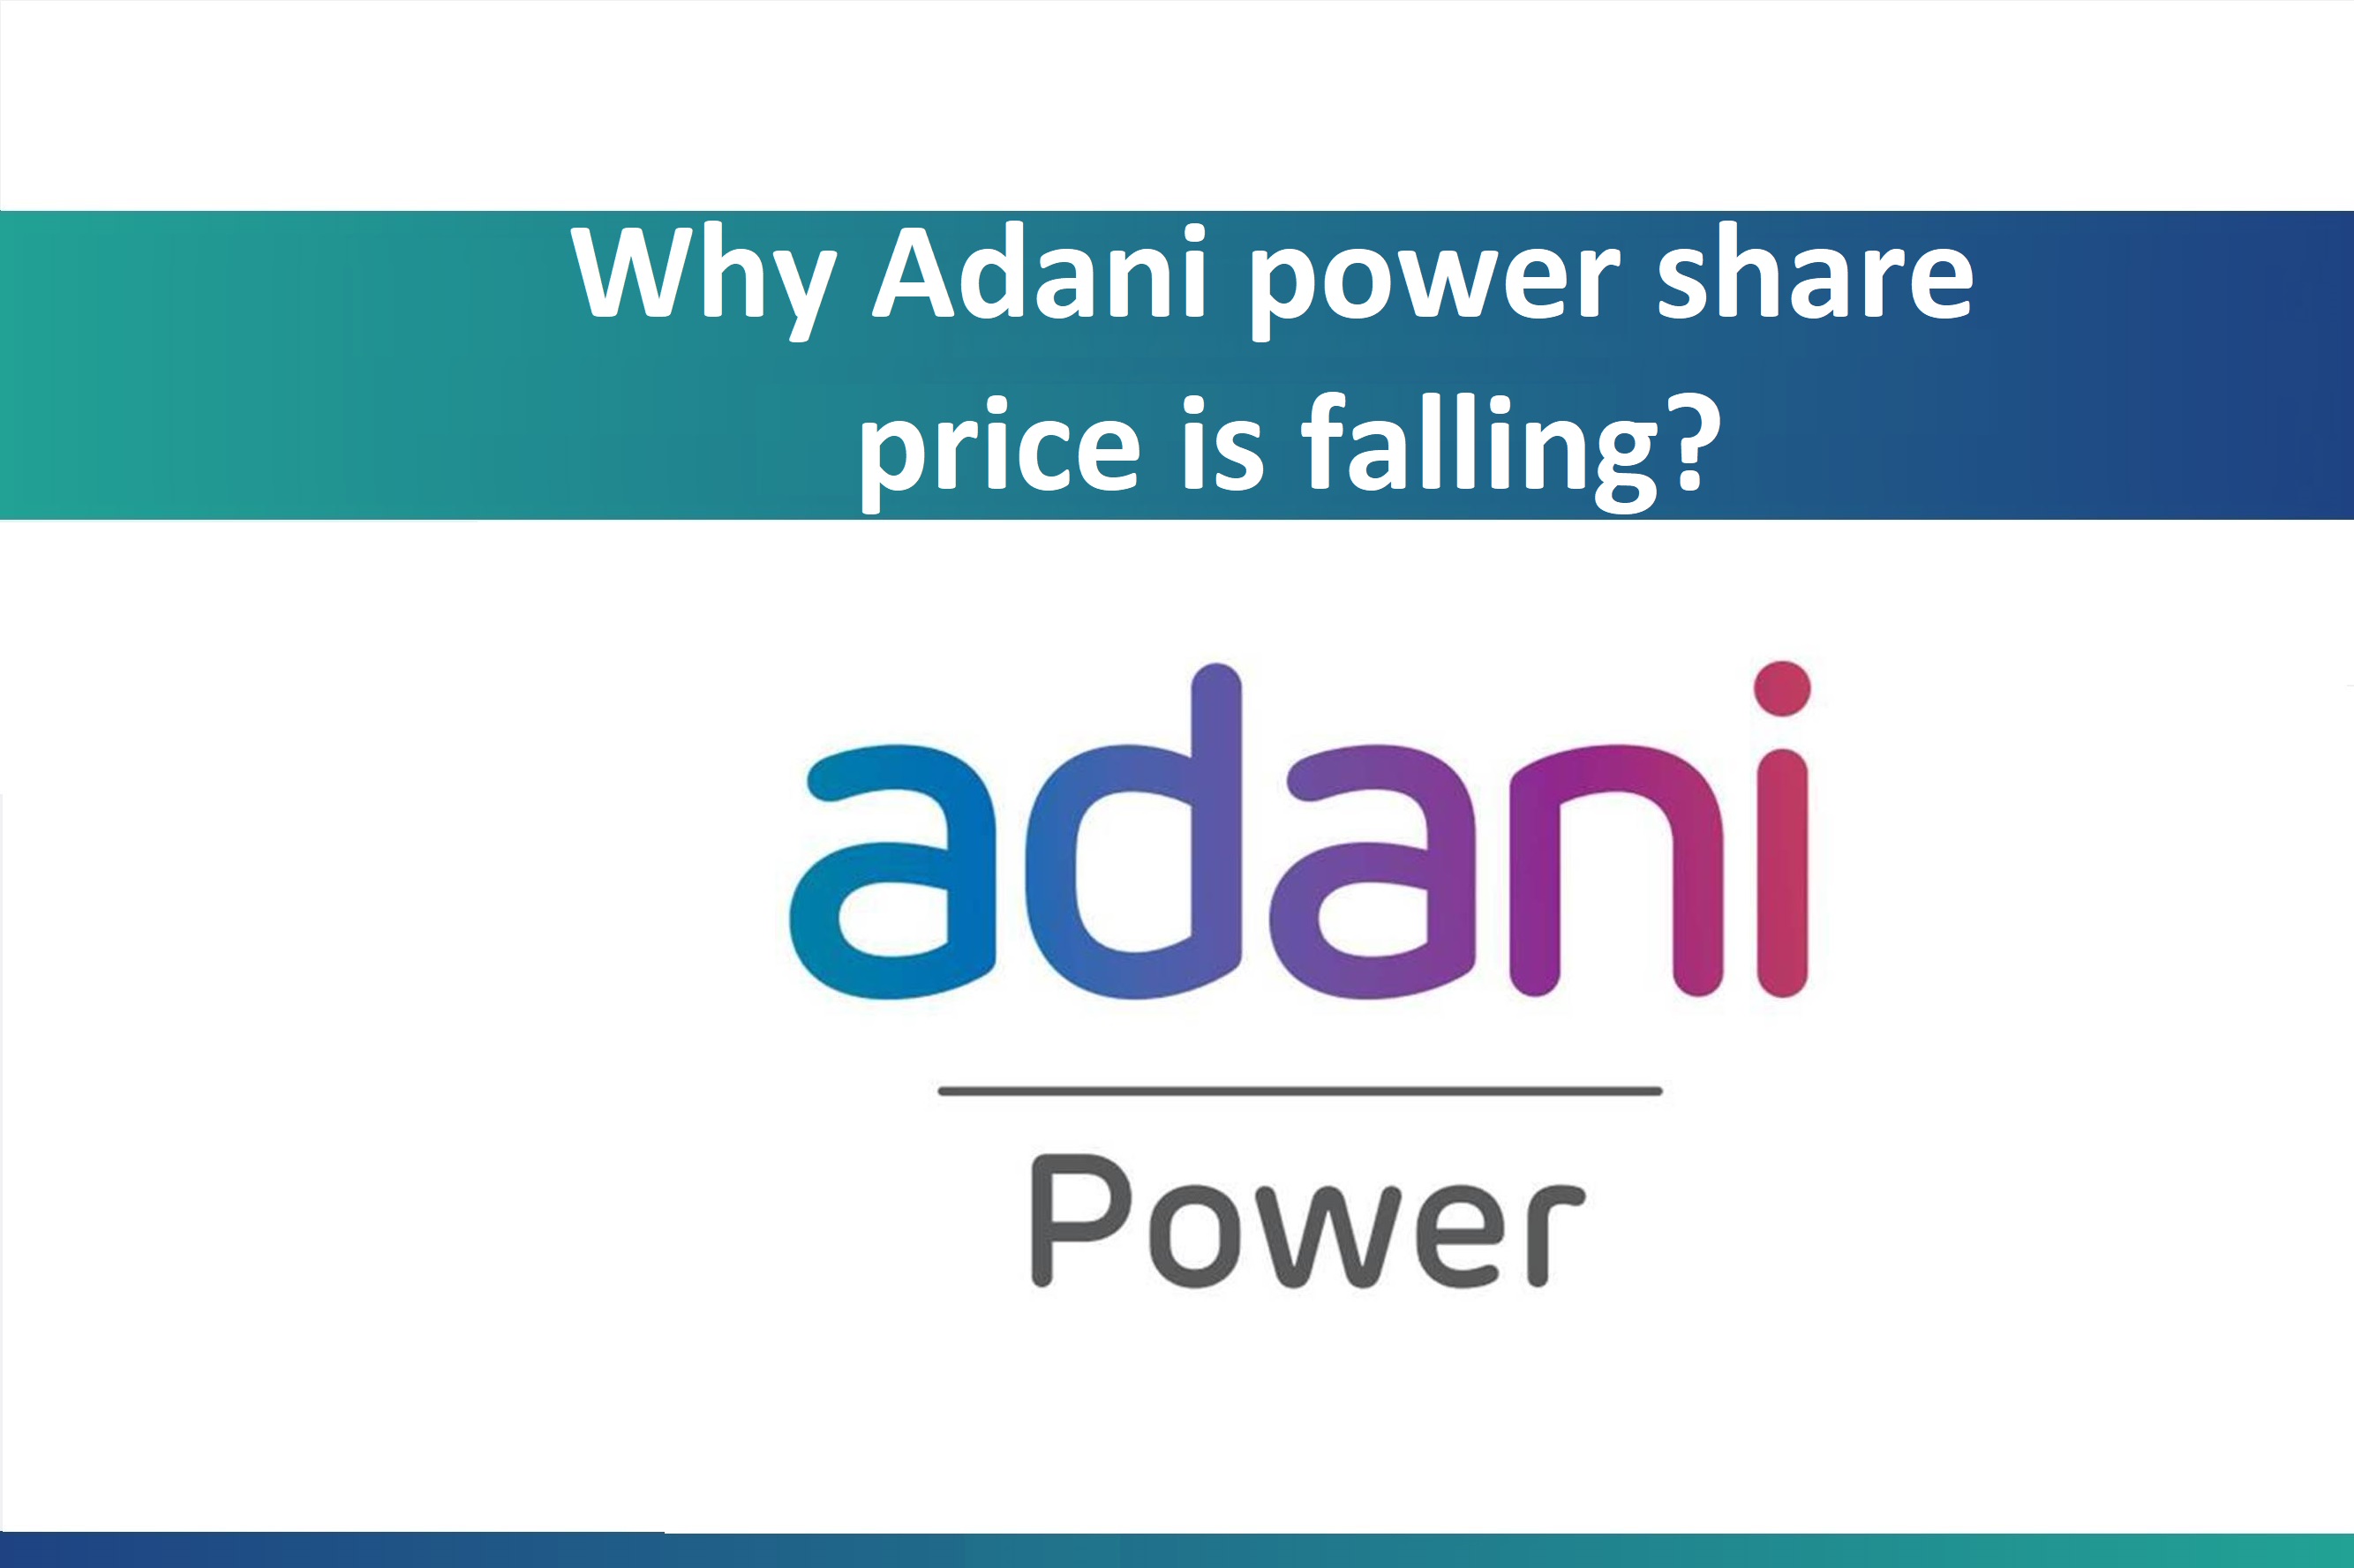 Why Adani power share price is falling?